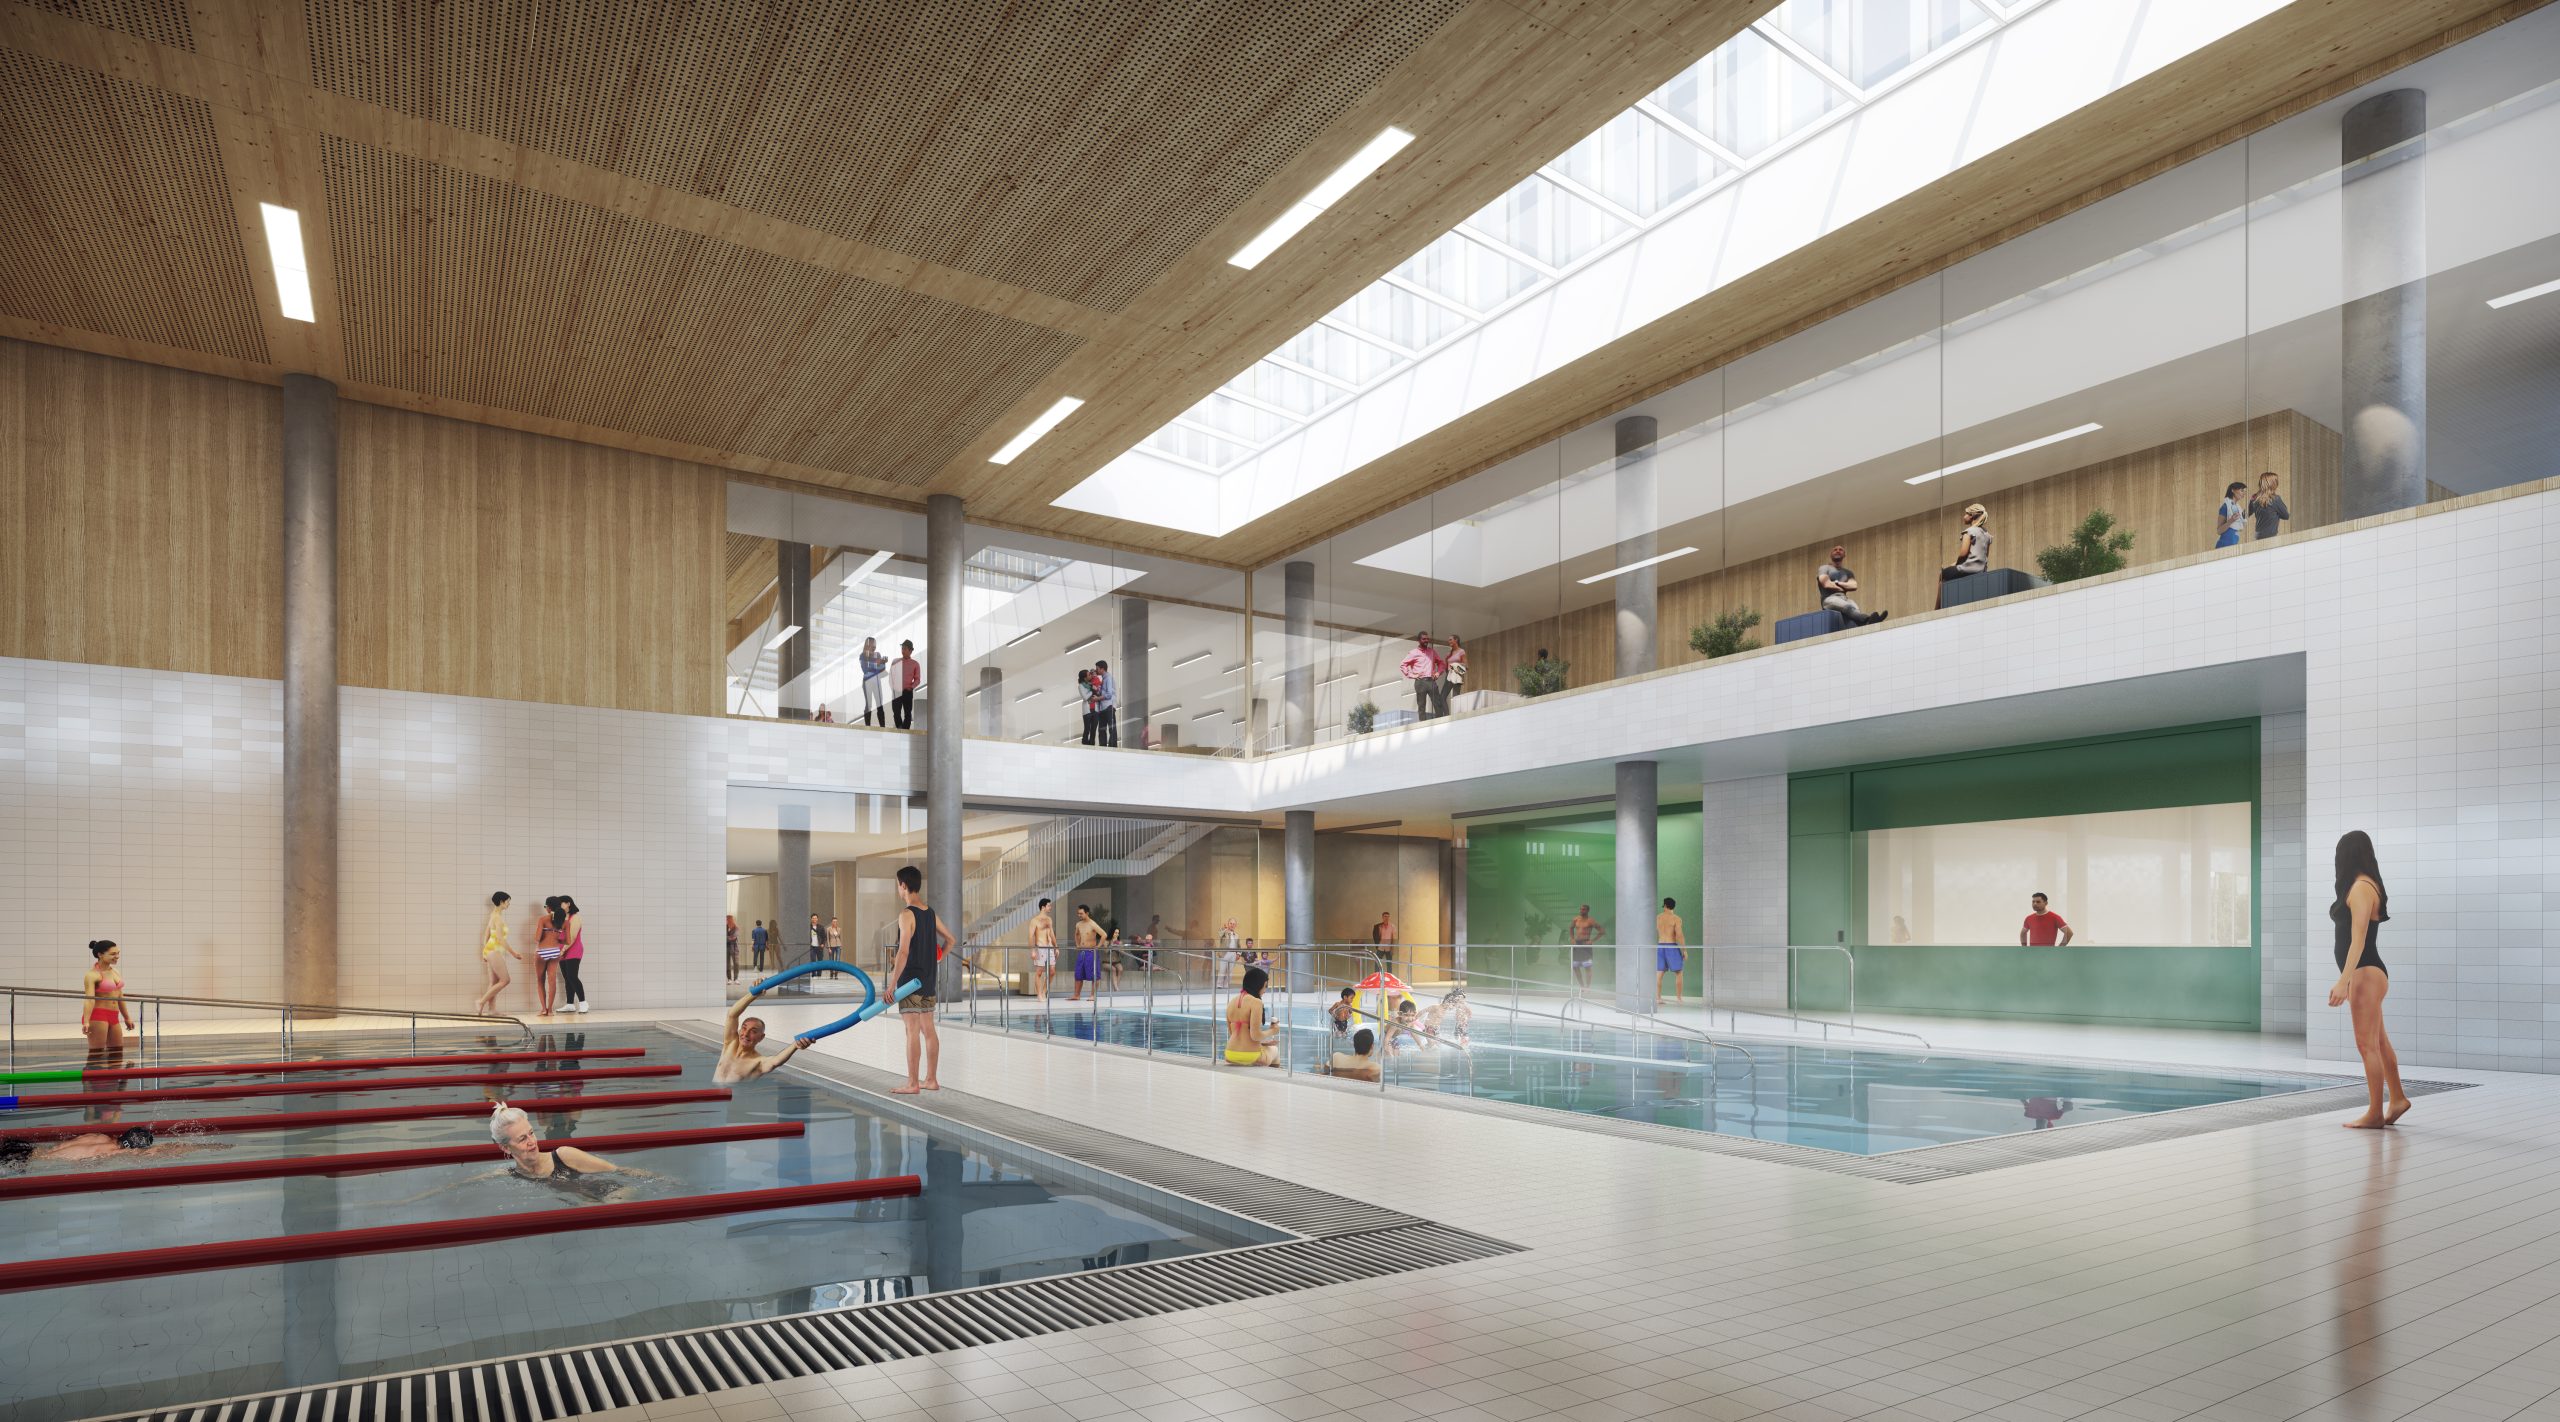 Rendering view of the pool area in the Etobicoke Civic Centre.